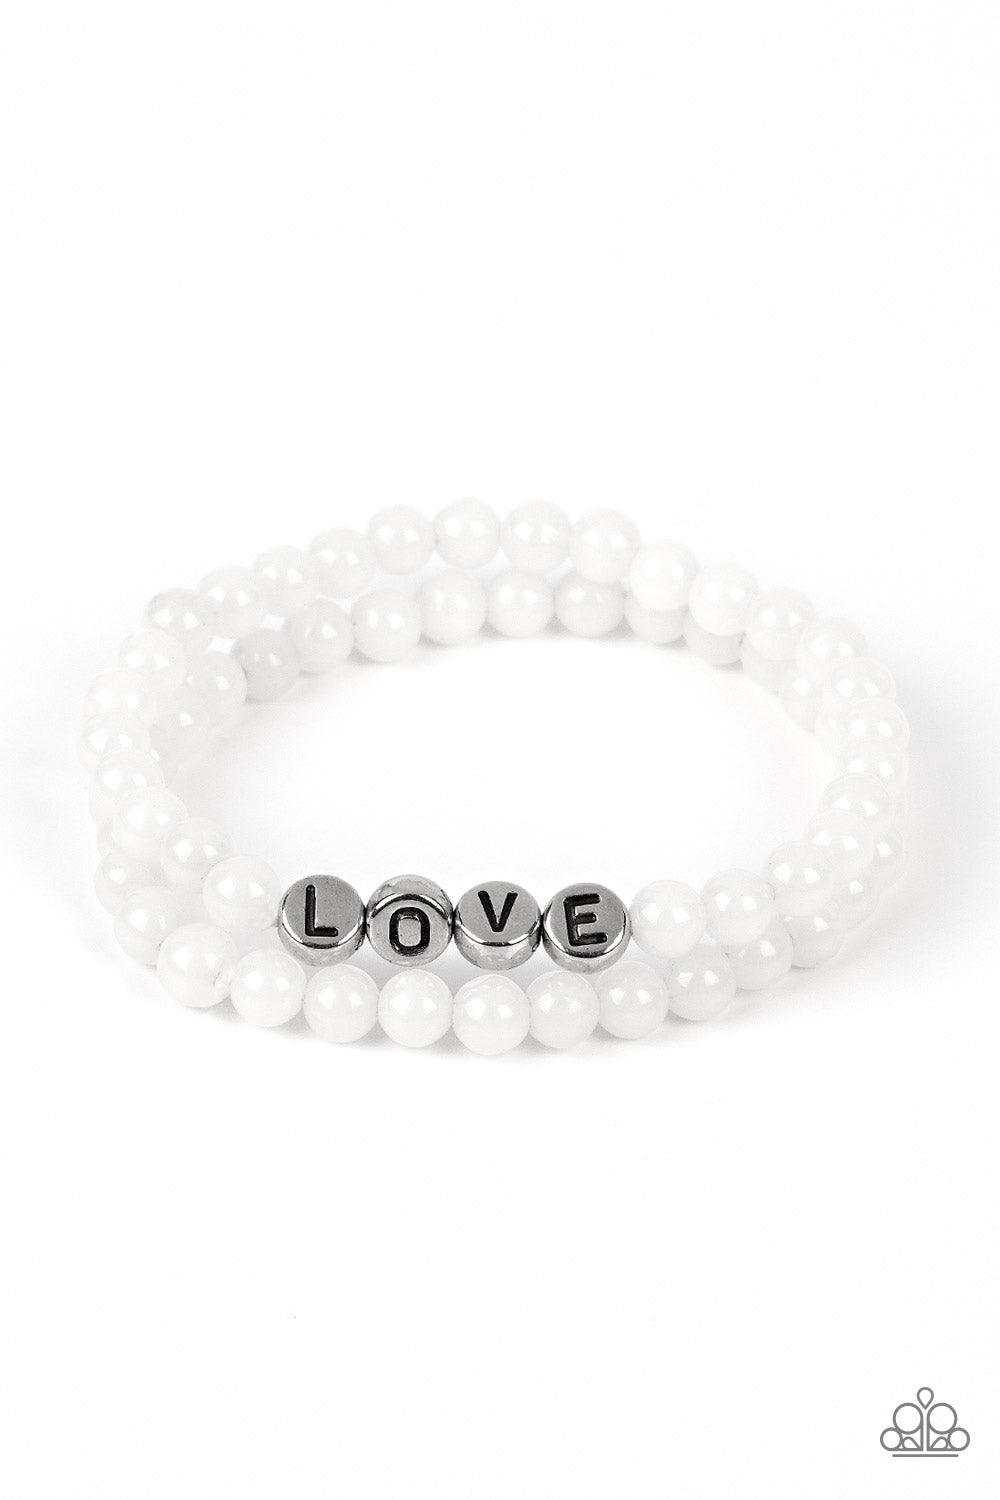 Devoted Dreamer - White Cloudy Beads & Silver Stamped "LOVE" Paparazzi Stretch Bracelet